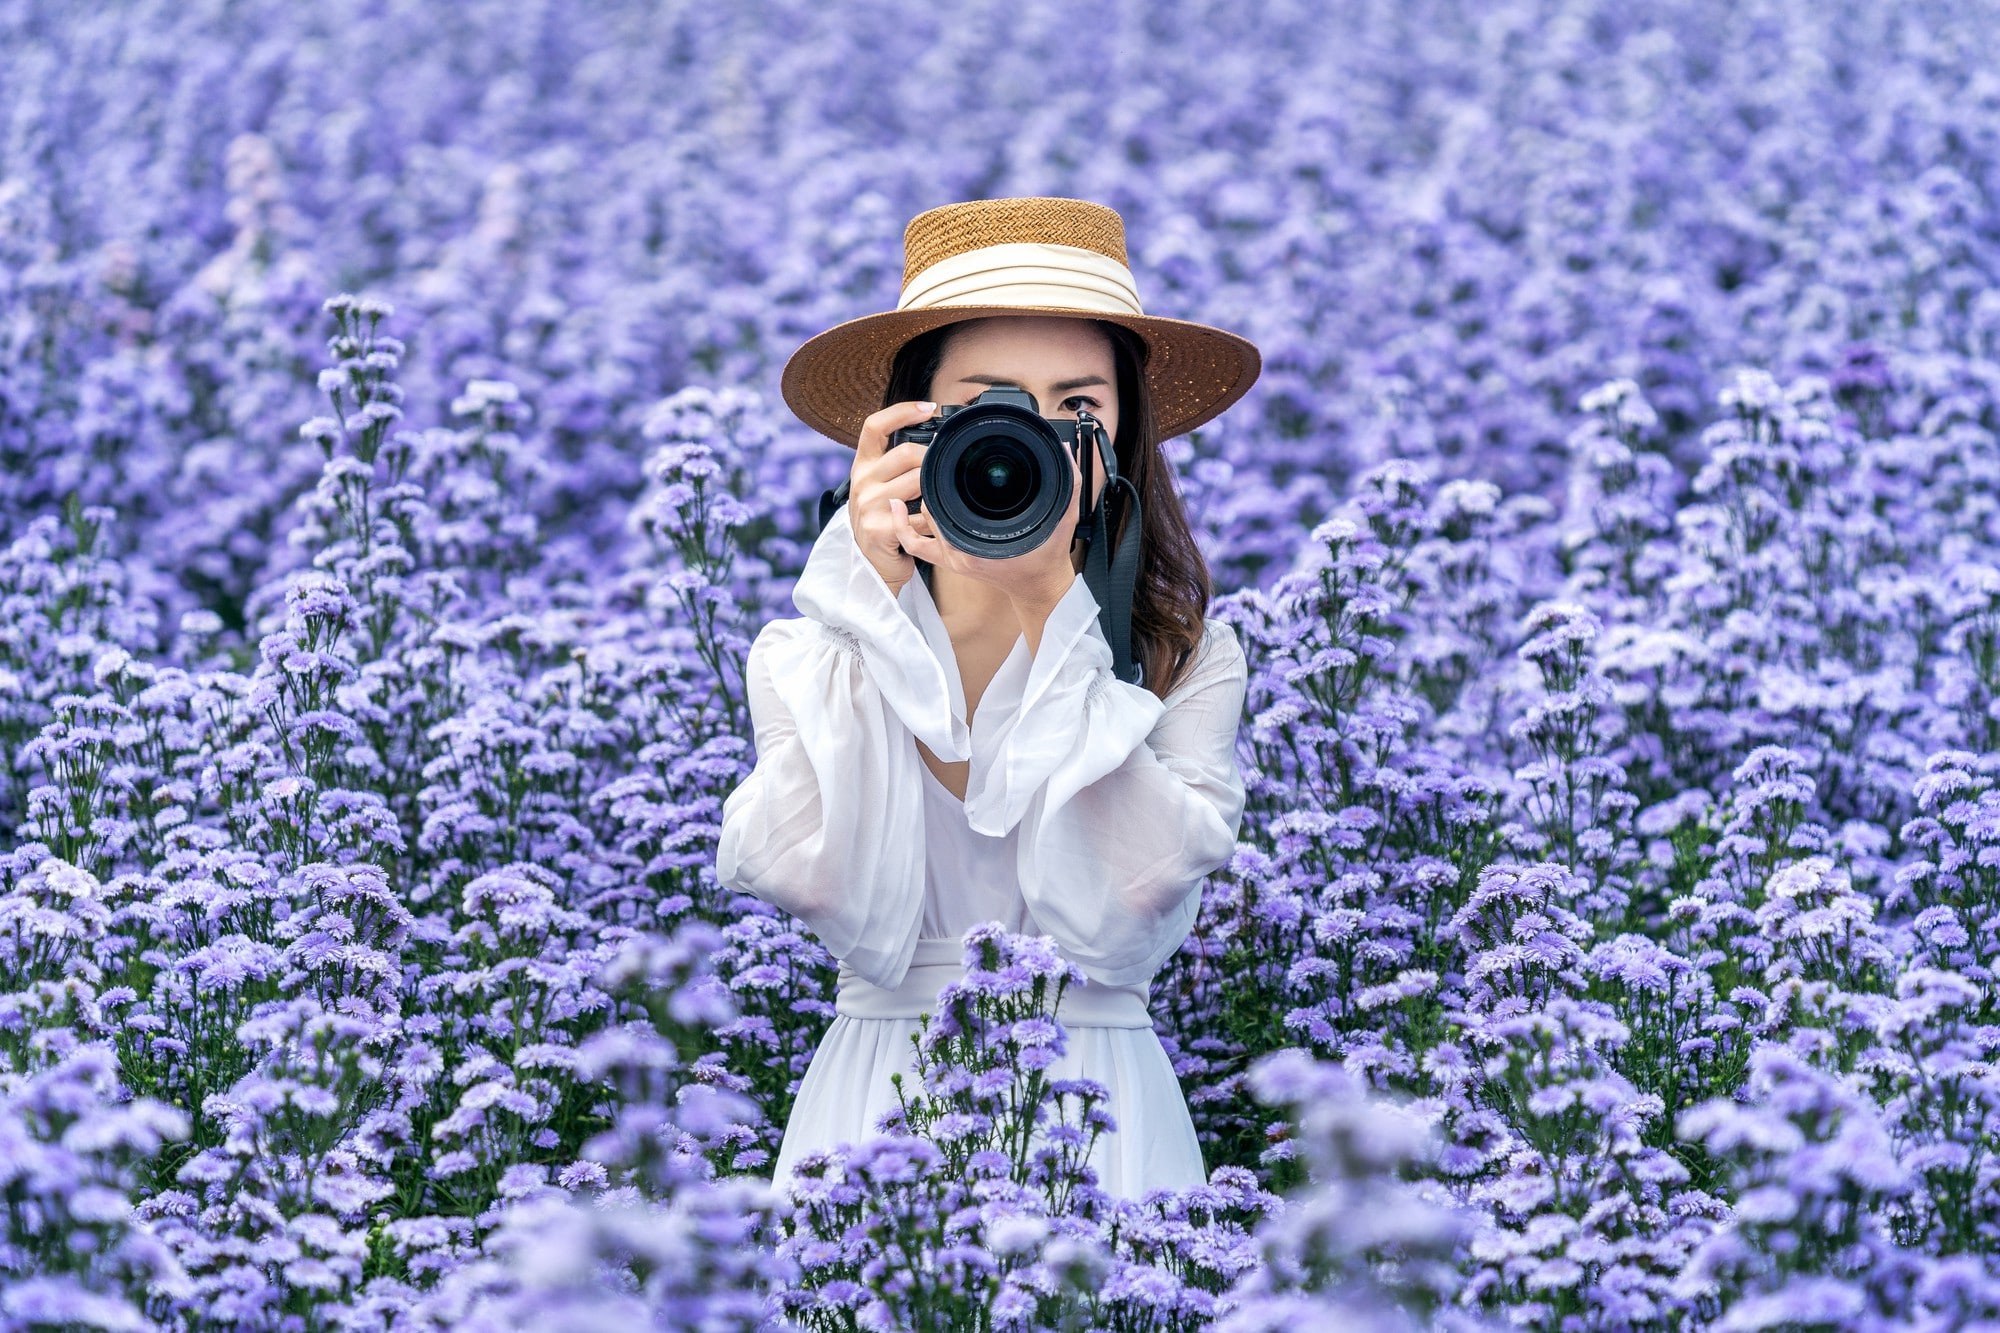 Asian photographer taking a photo in a field of Margaret flowers